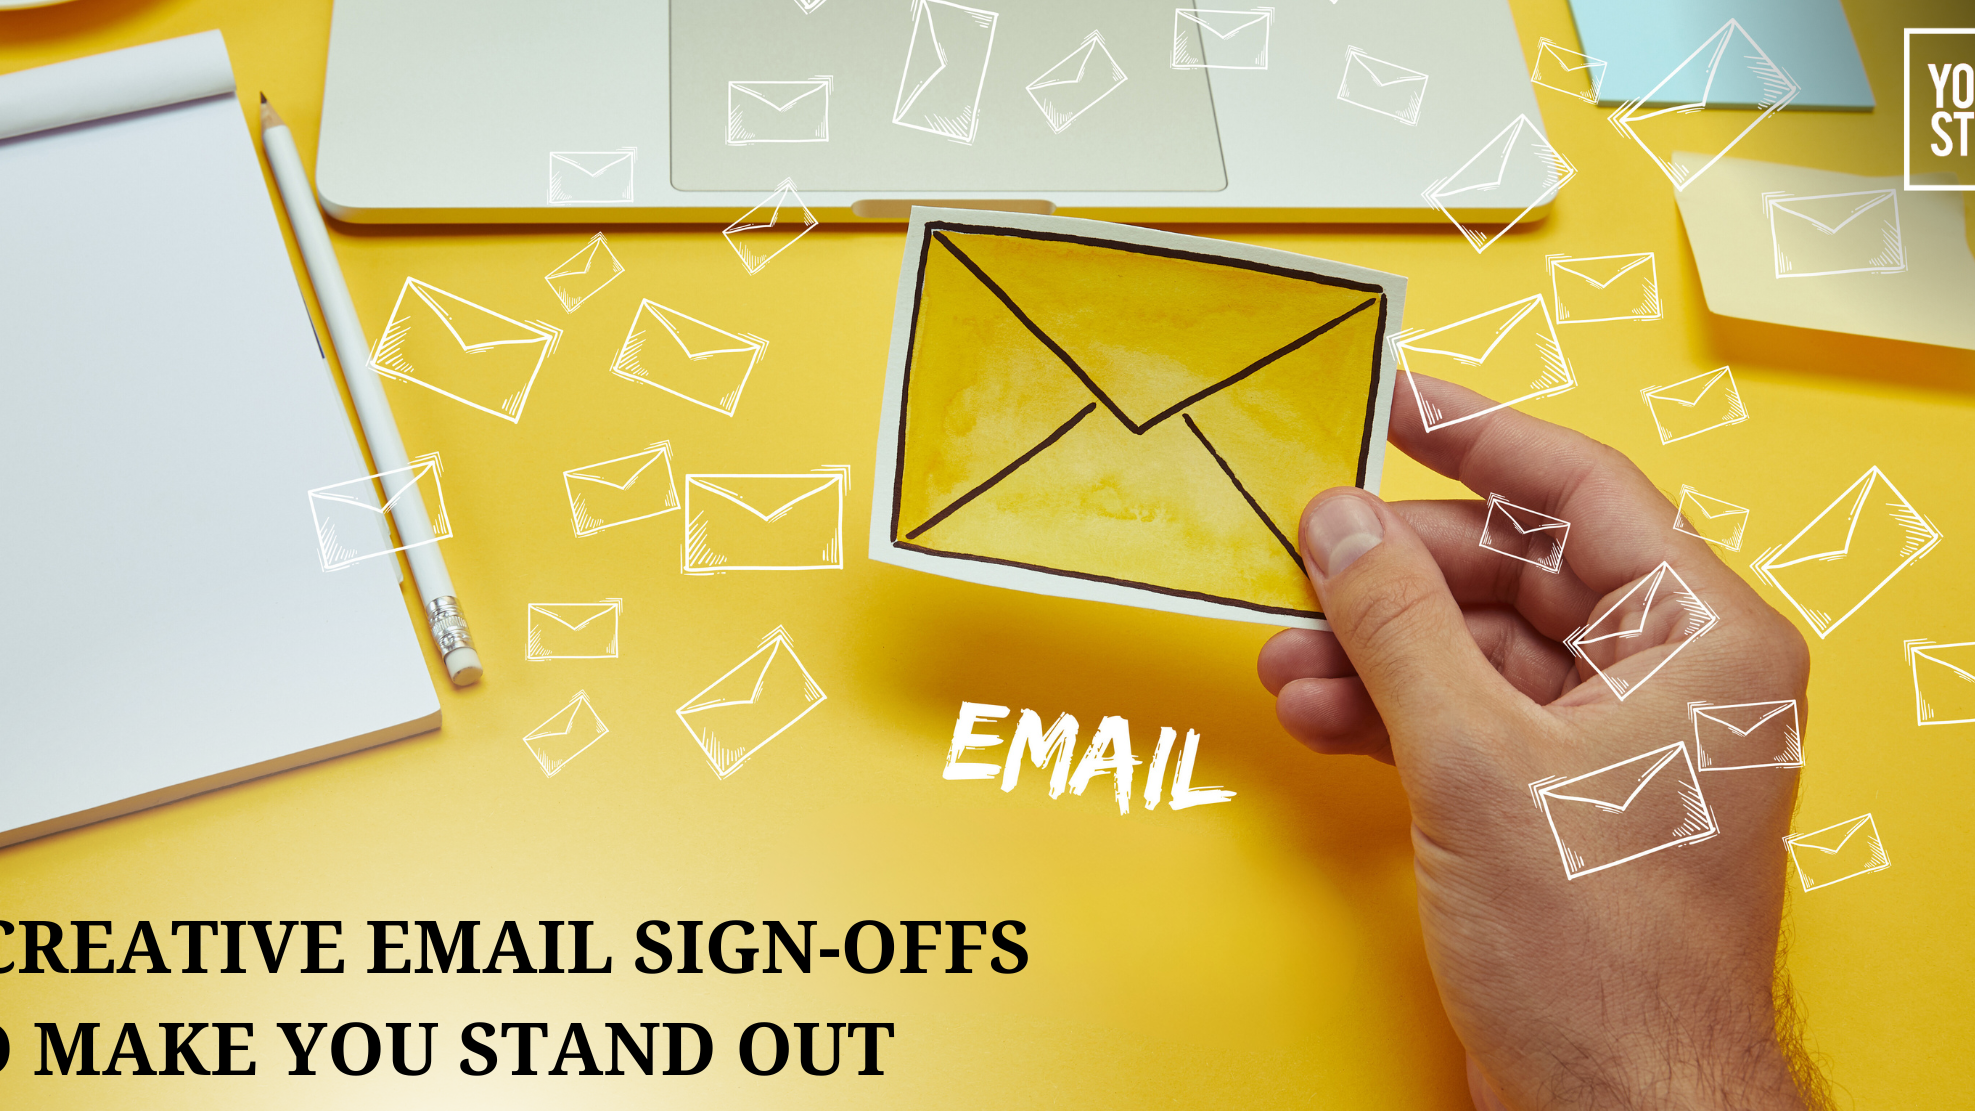 Ditch "Best Regards": 5 Creative Email Sign-Offs to Make You Stand Out